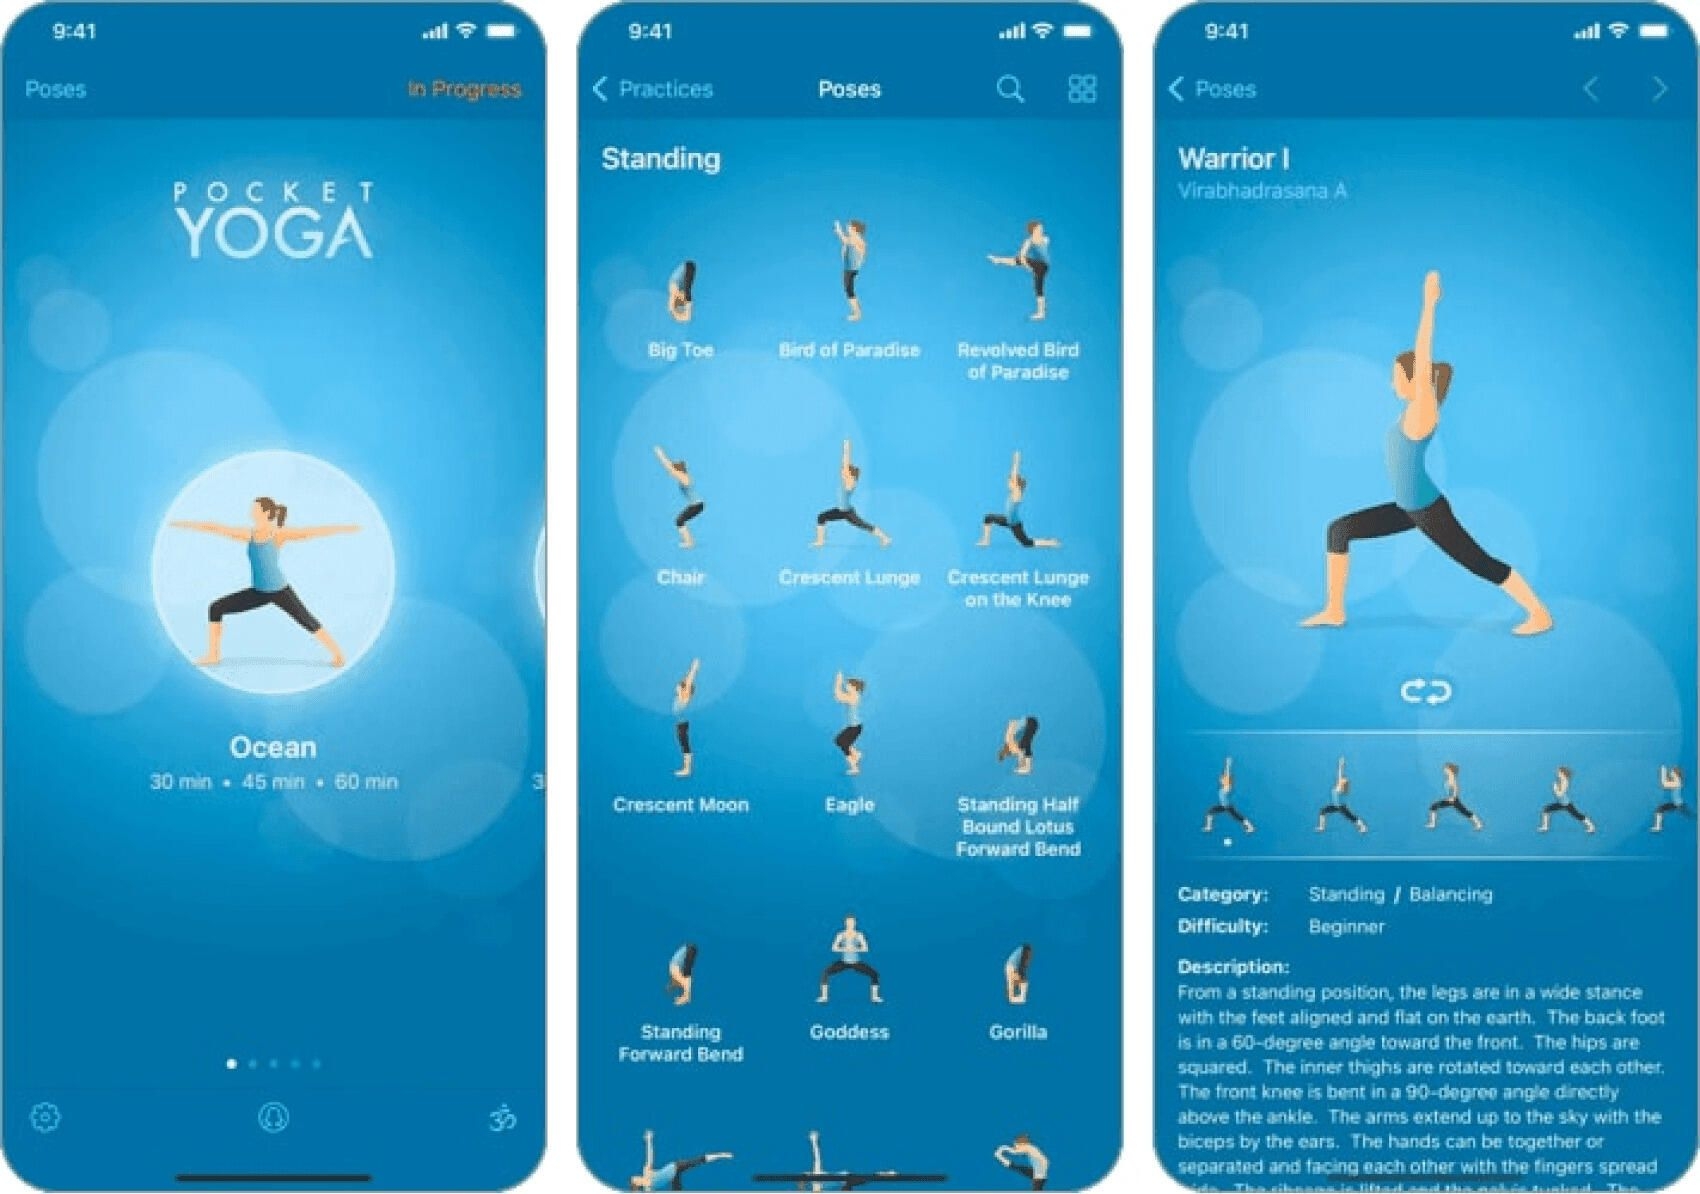 Yoga Creator ToolKit – 19 Essential Tools to Launch Your Online